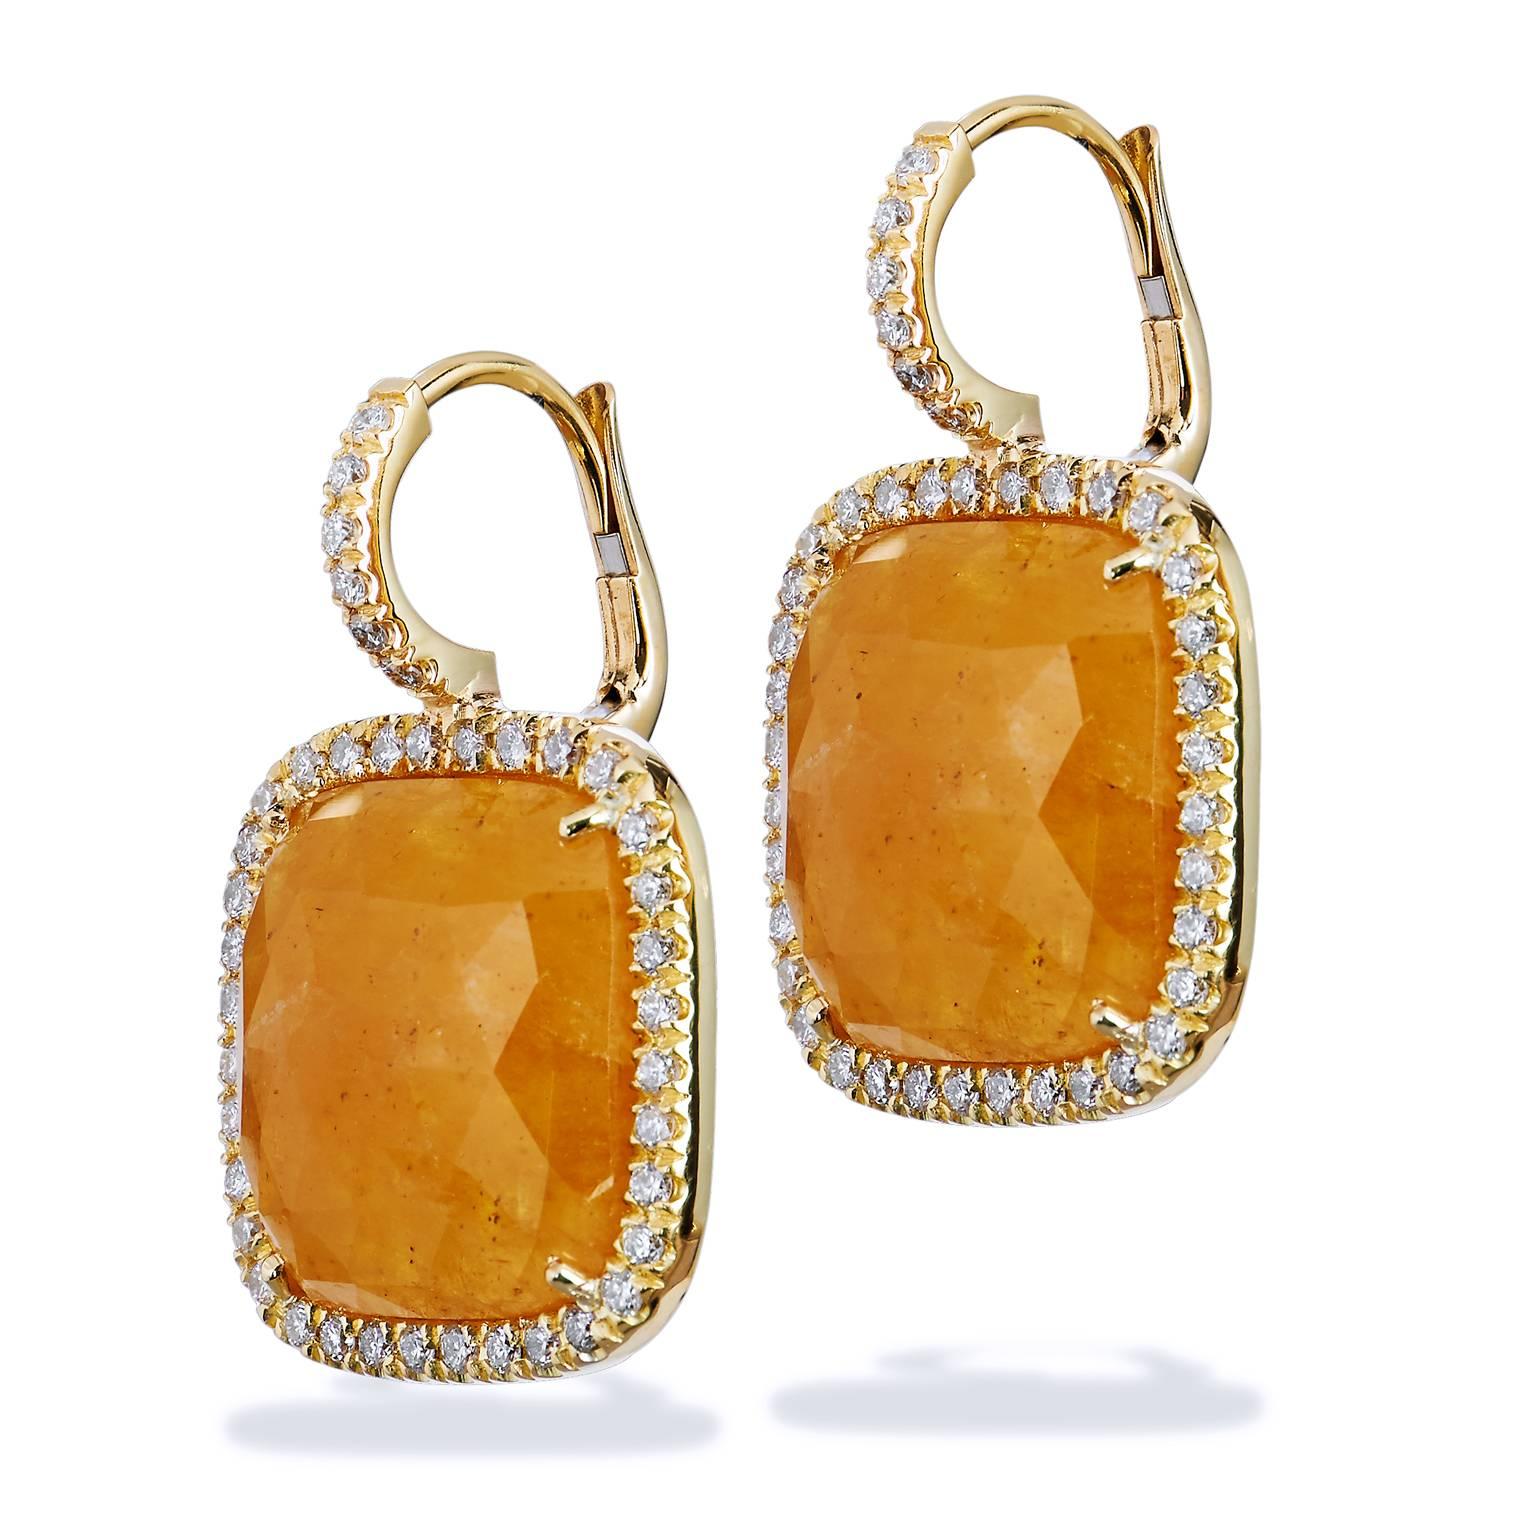 13.58 Carat Cushion Cut Yellow Sapphire Slice Diamond Gold Earrings

An original H and H design, these handcrafted 18 karat yellow gold earrings feature 13.58 carat of yellow sapphire slices. Slices provide an interesting presentation that allow the